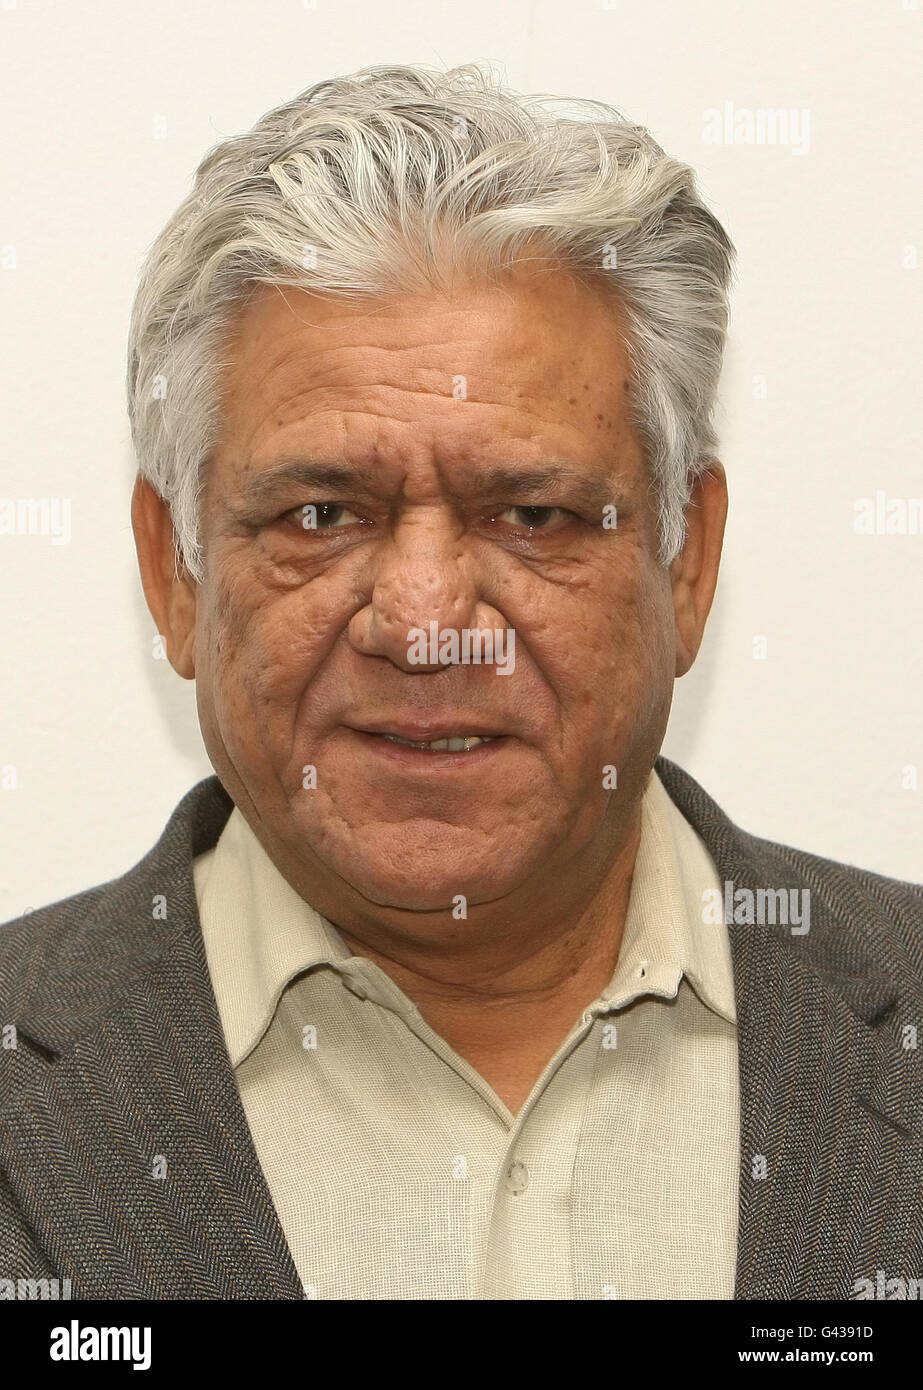 West is West premiere - London. Om Puri at the premiere of West is West, at the BFI Southbank, in Waterloo, central London. Stock Photo